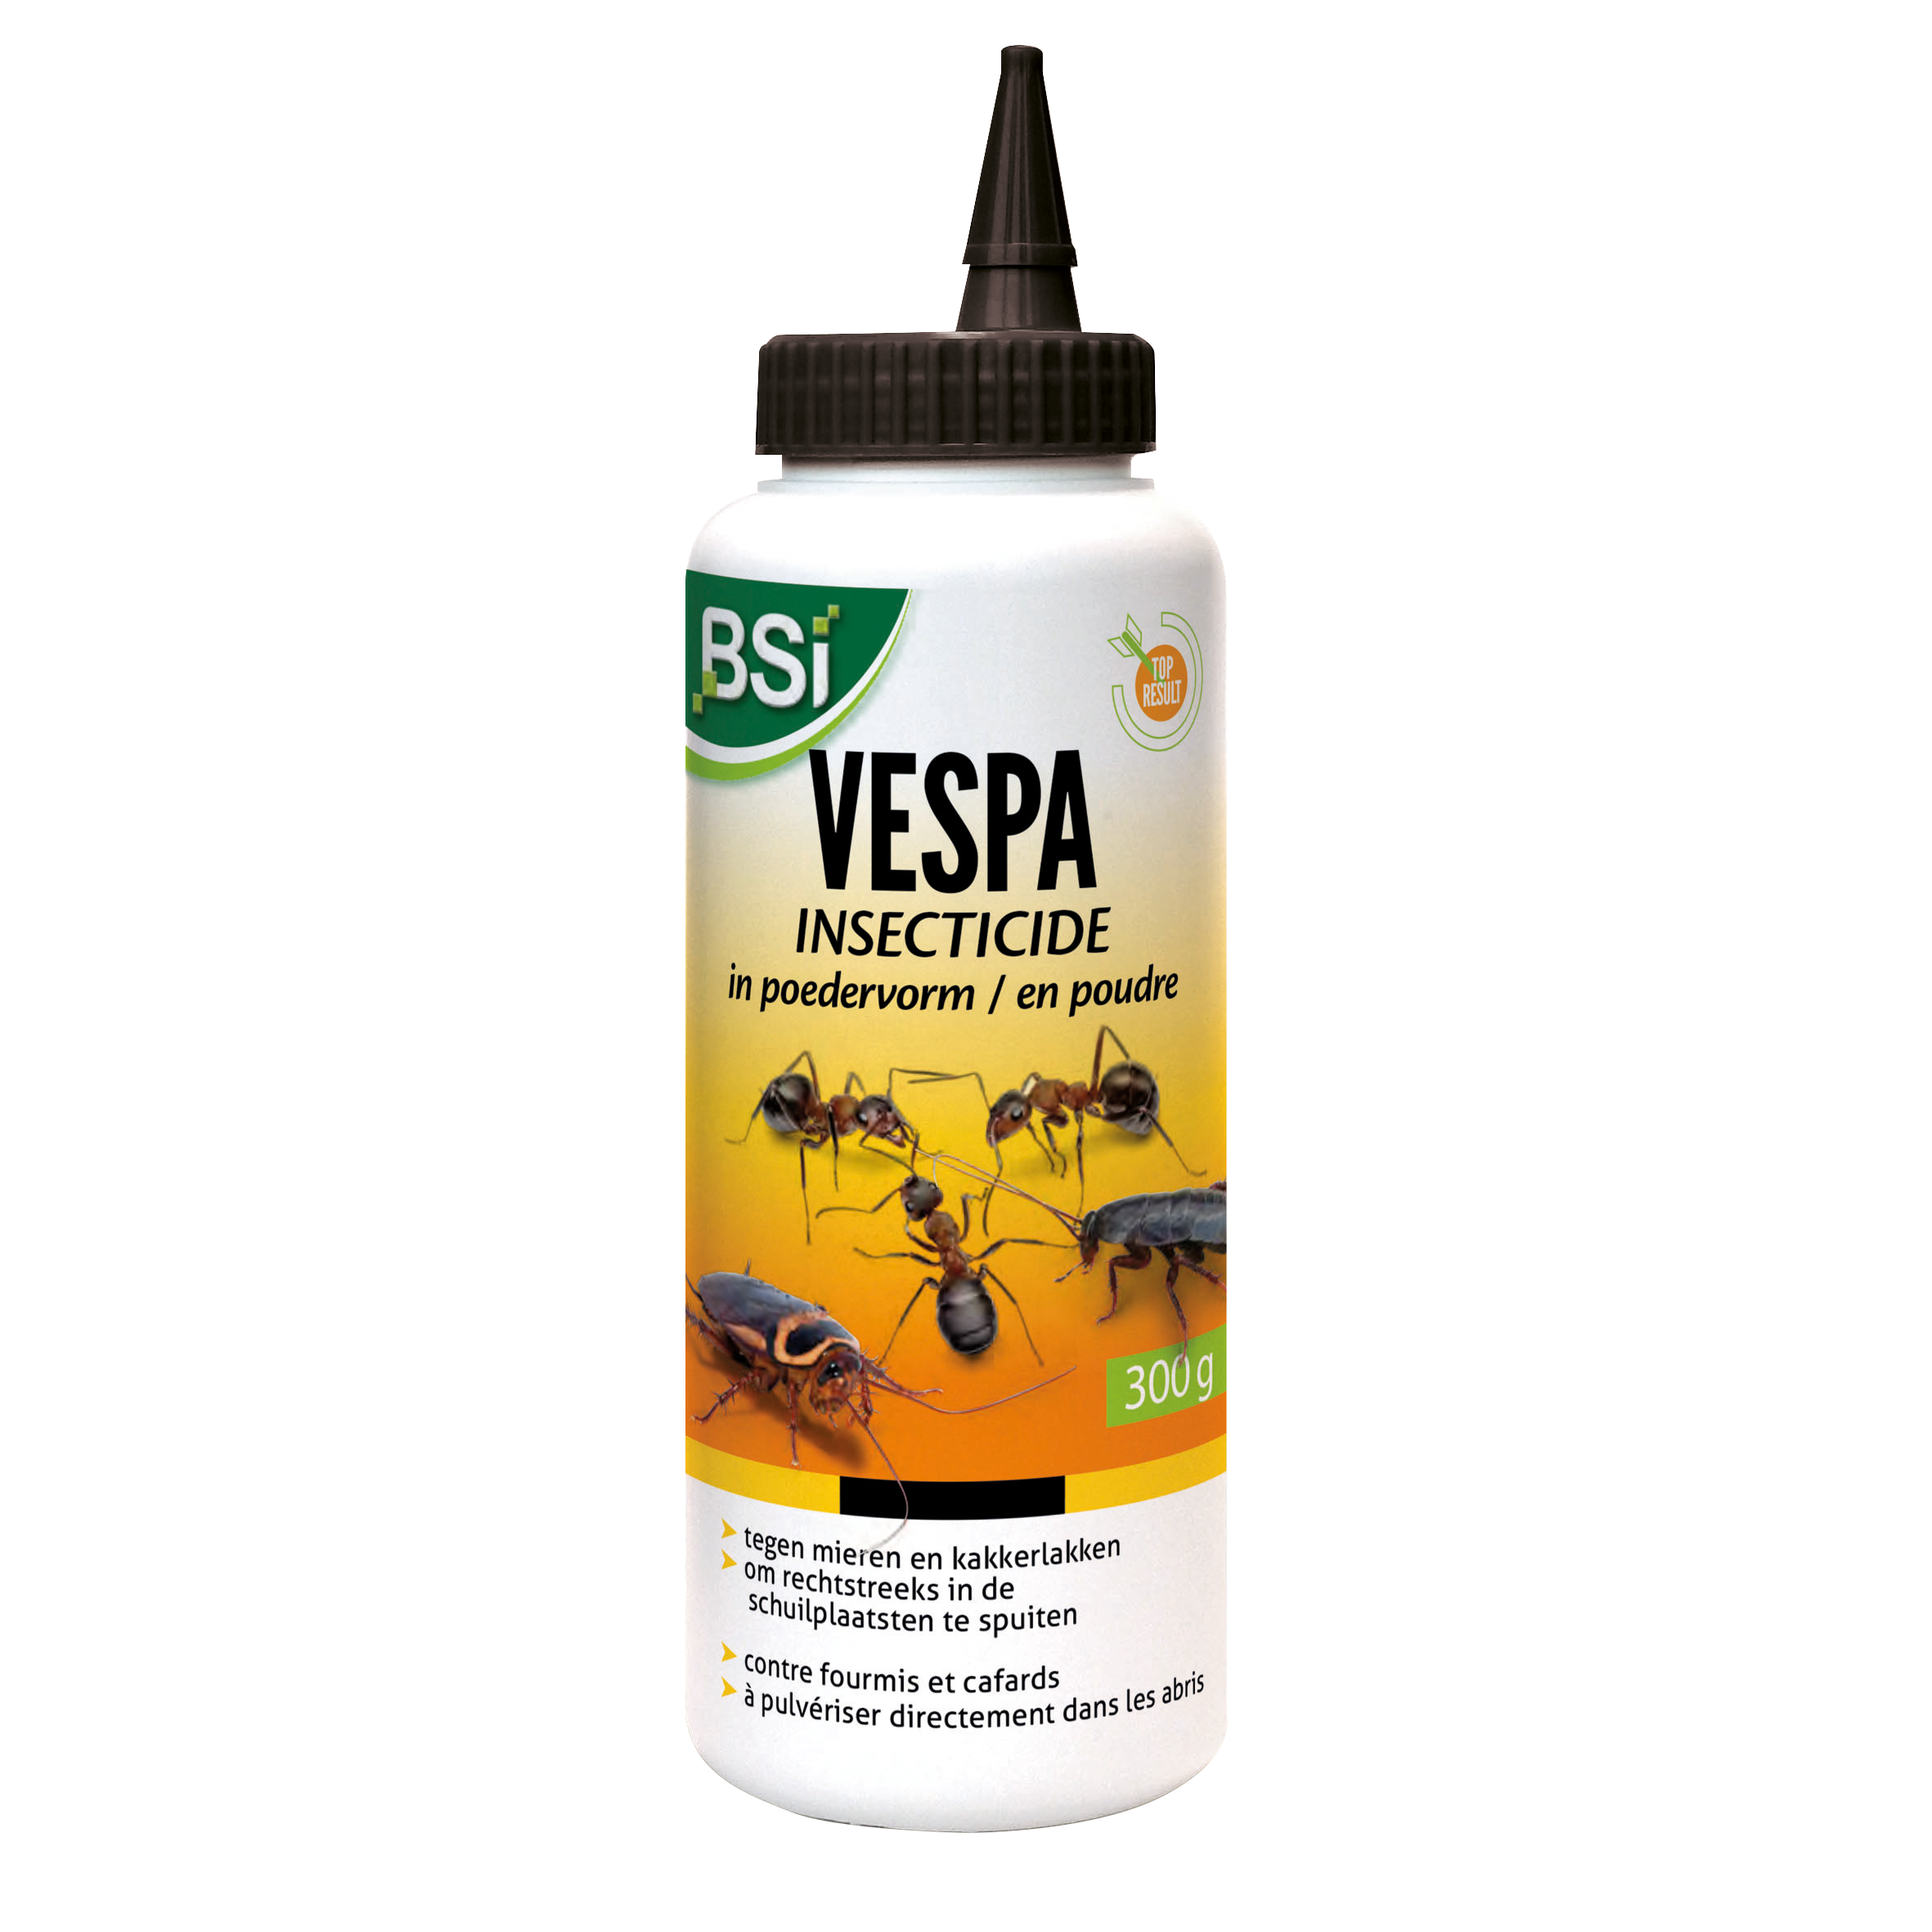 Vespa Insecticide - BSI 300g BE/LU image